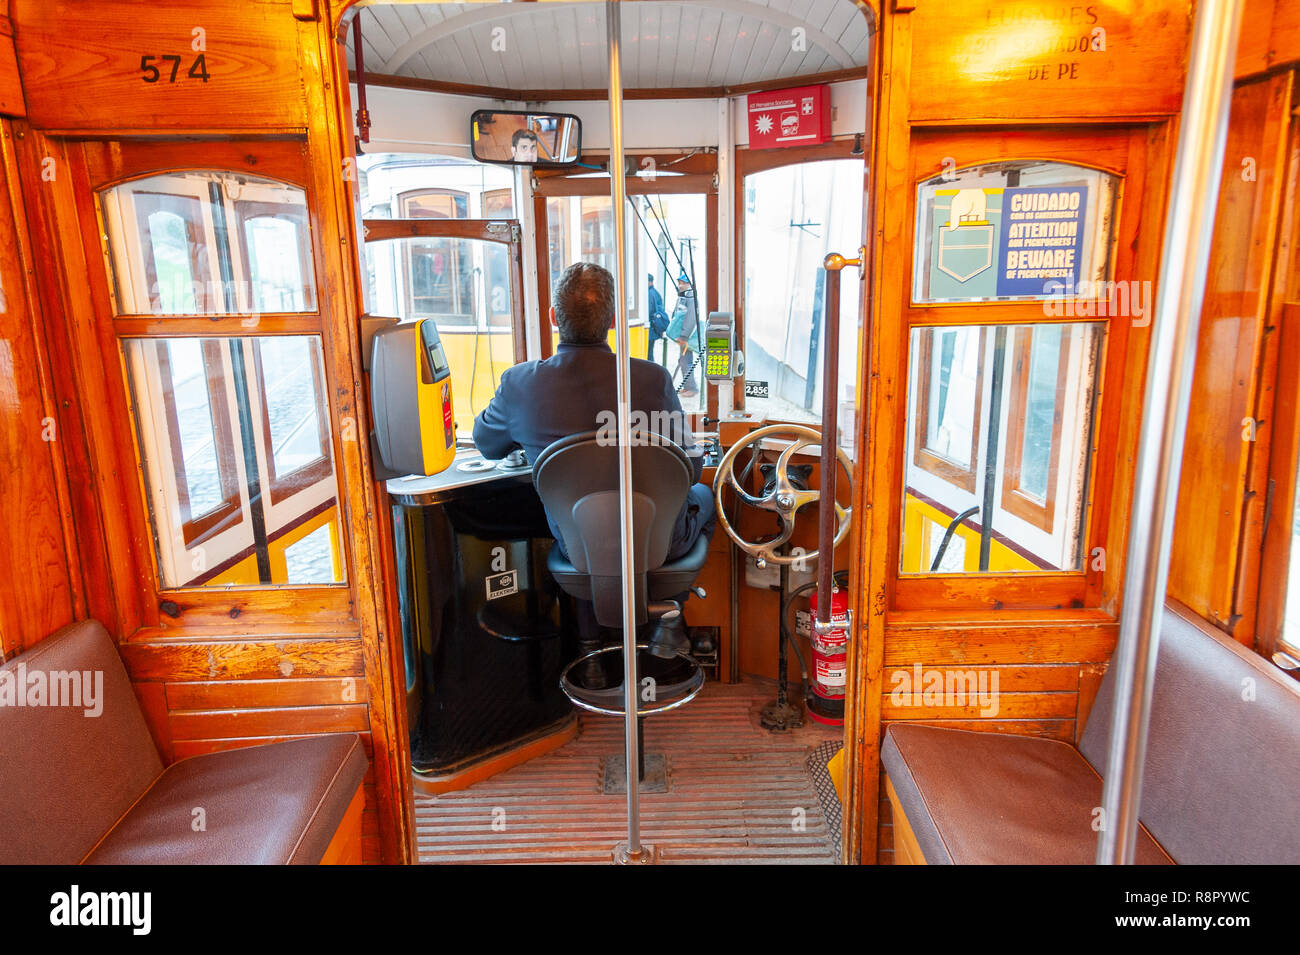 Interior of a traditional tram, Lisbon, Portugal Stock Photo